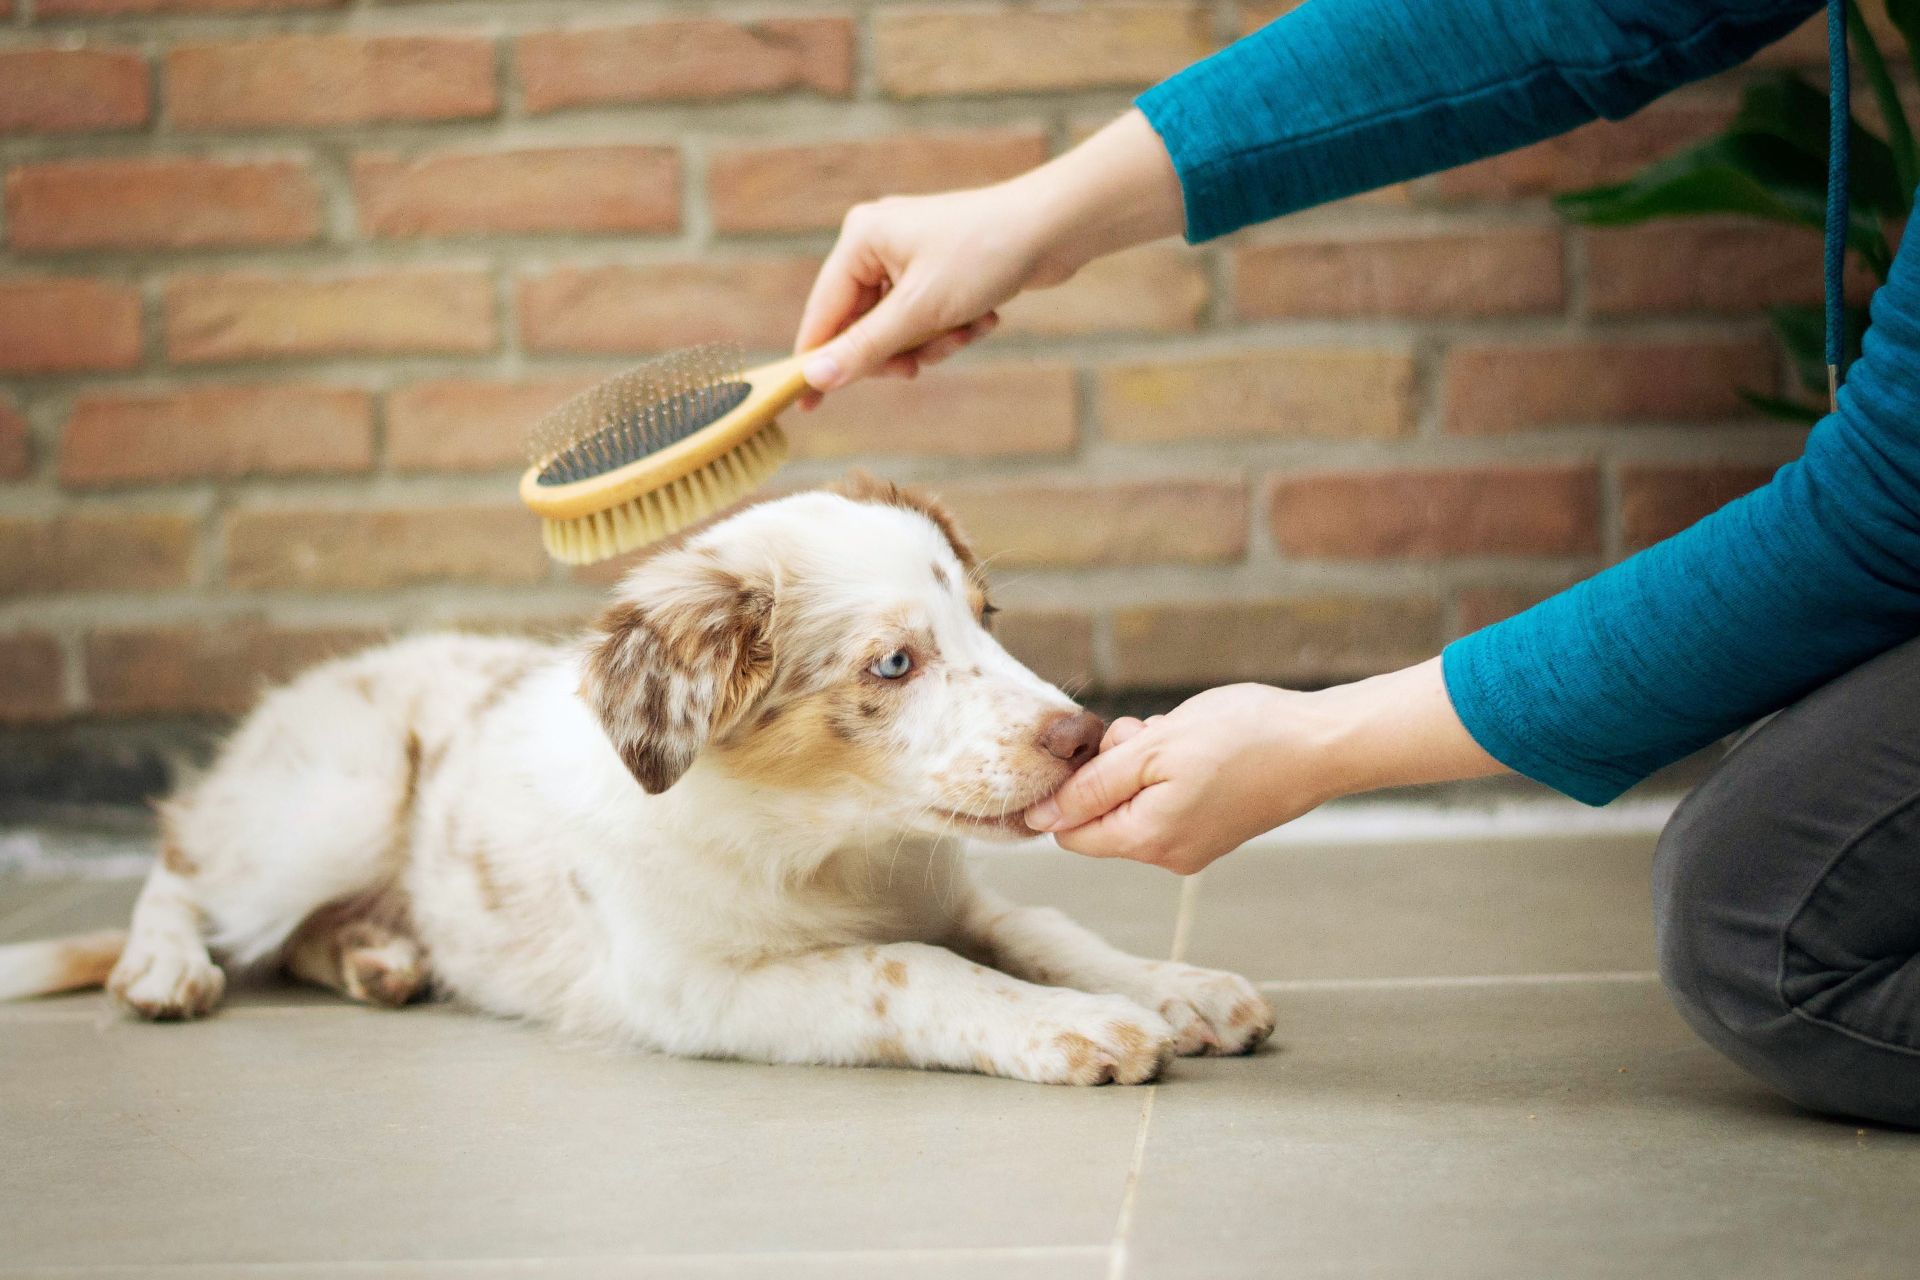 keep your dog groomed to reduce odors and dog hair in your home